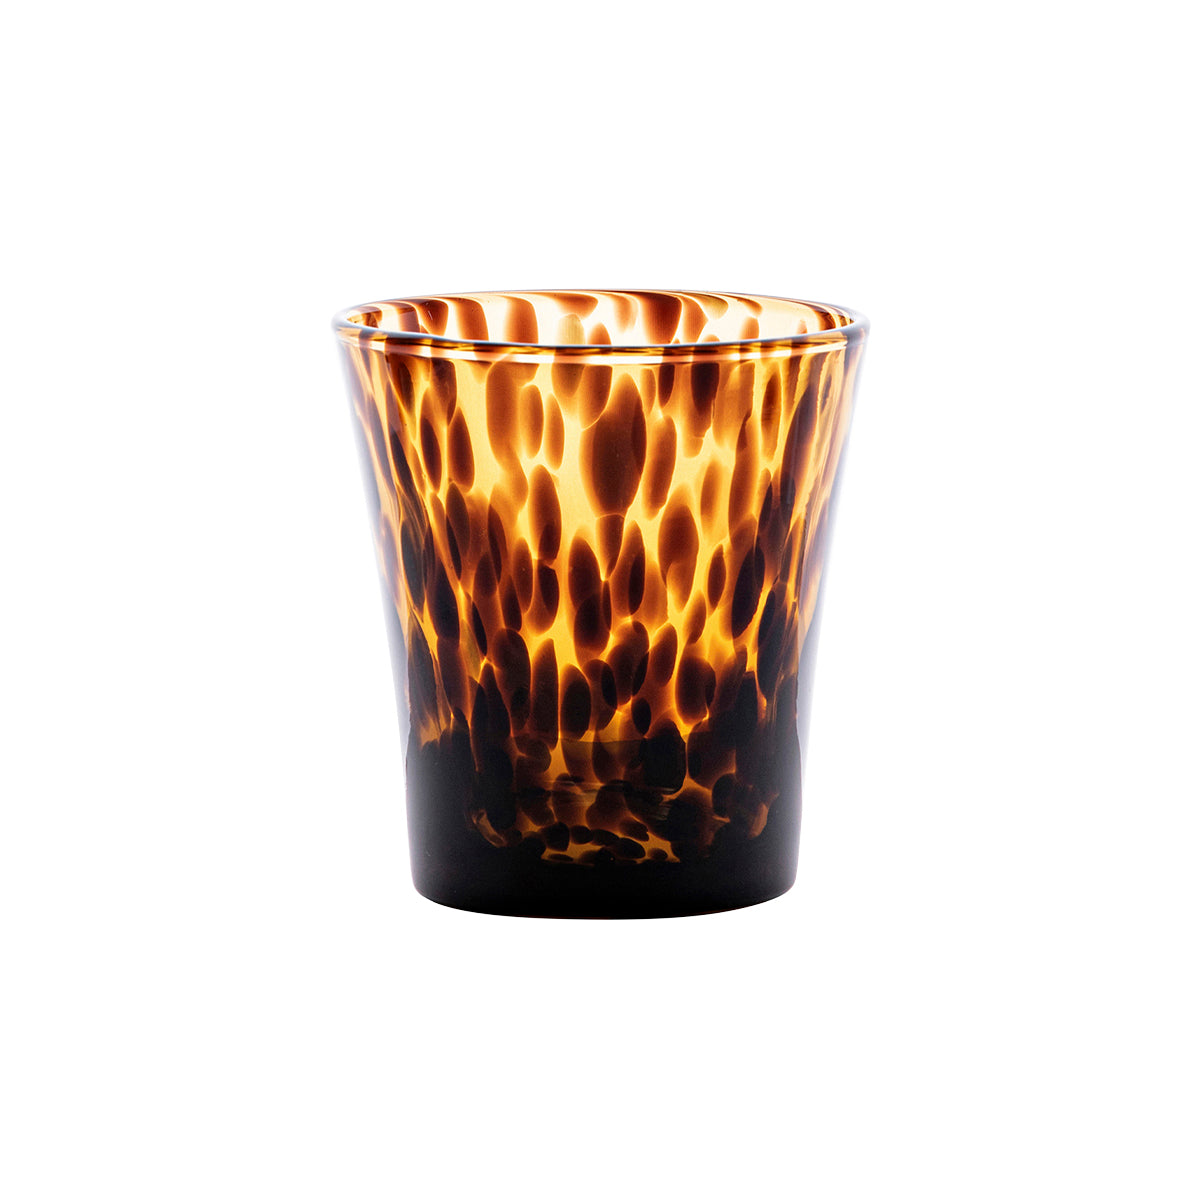 Our richly hued tortoiseshell glassware with translucent brown body and dark specks make a handsome statment on every table. This versatile small tumbler can hold everything - from fruit infused spritzers to fresh juices and a hand-crafted cocktail. 